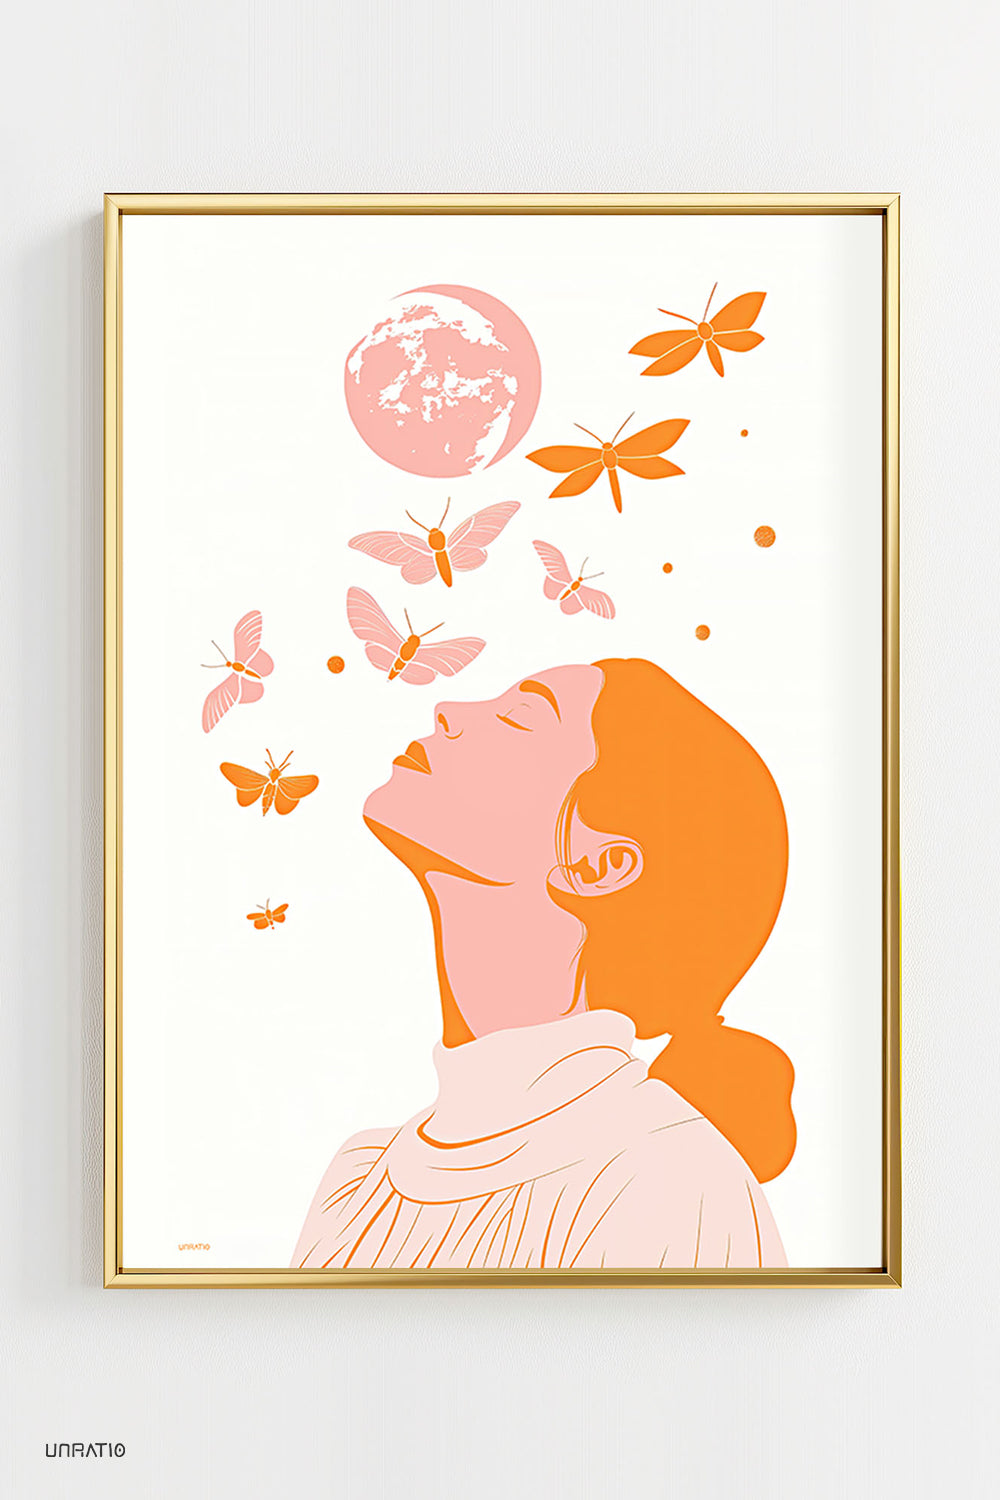 Framed art print featuring a woman gazing at a pink moon with moths and orange leaves, a tranquil, dreamy wall decor piece.